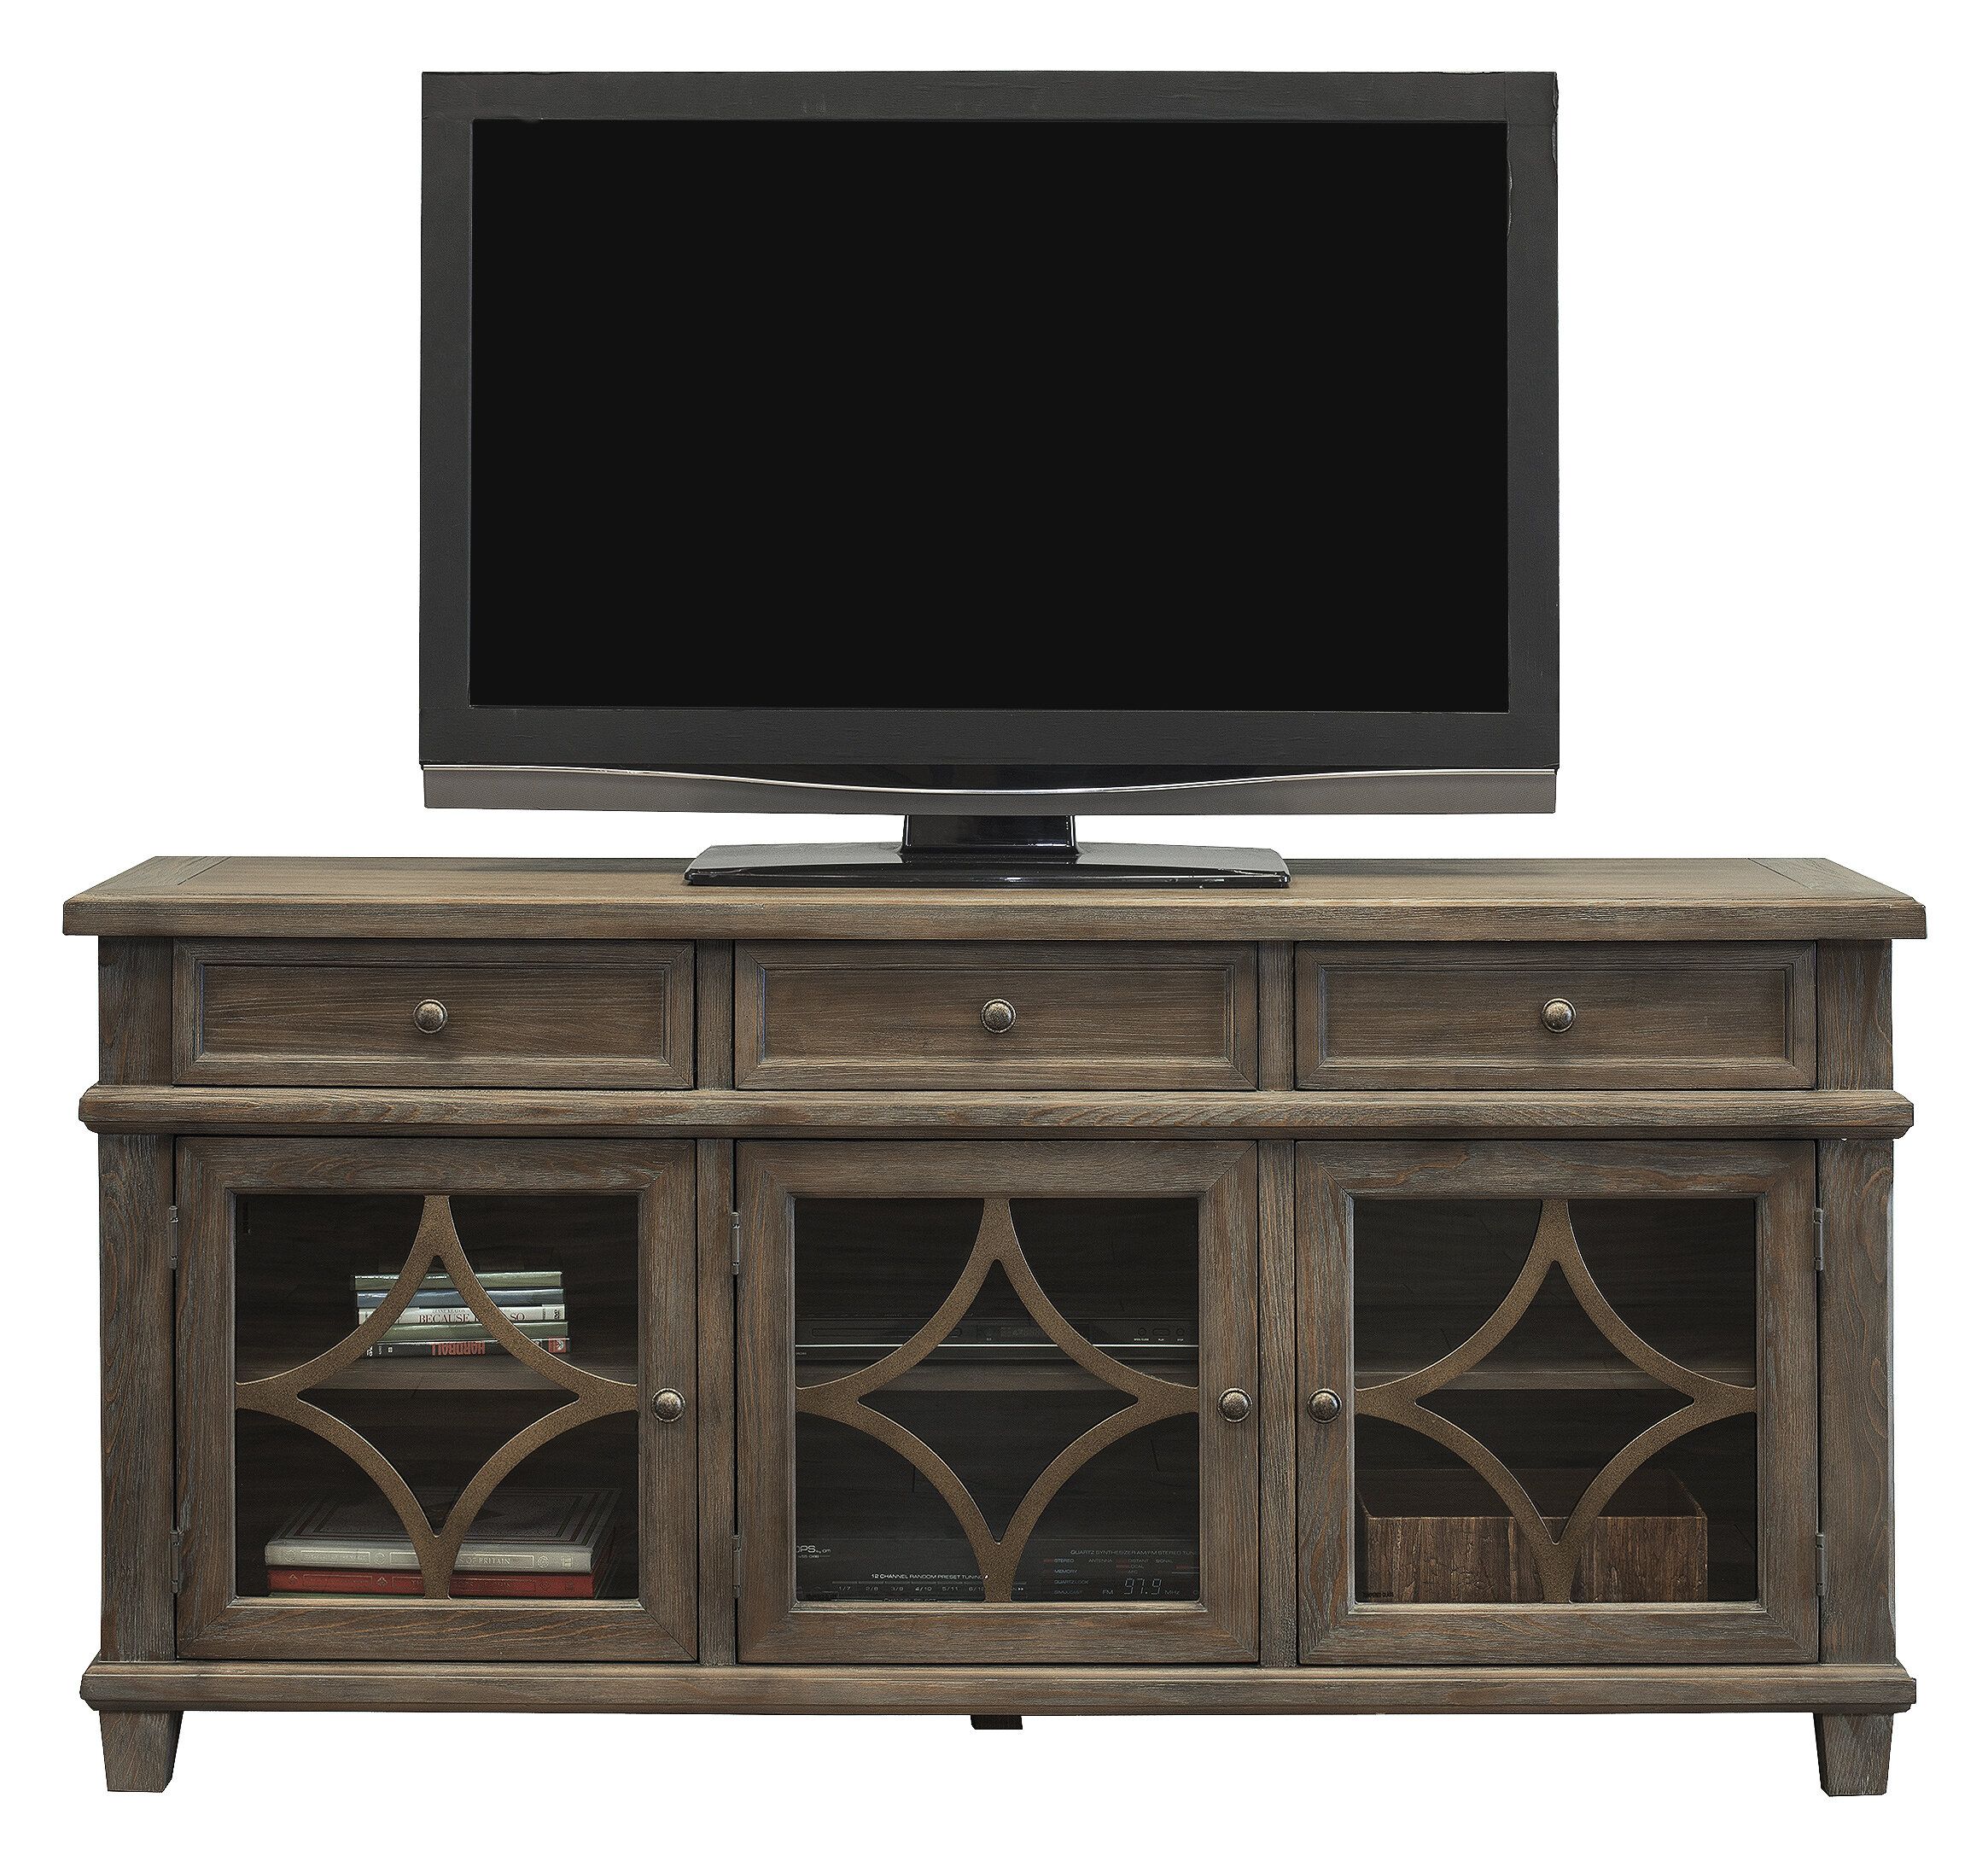 Ortiz Three Door Tv Stand For Tvs Up To 70" Pertaining To Ericka Tv Stands For Tvs Up To 42" (View 13 of 30)